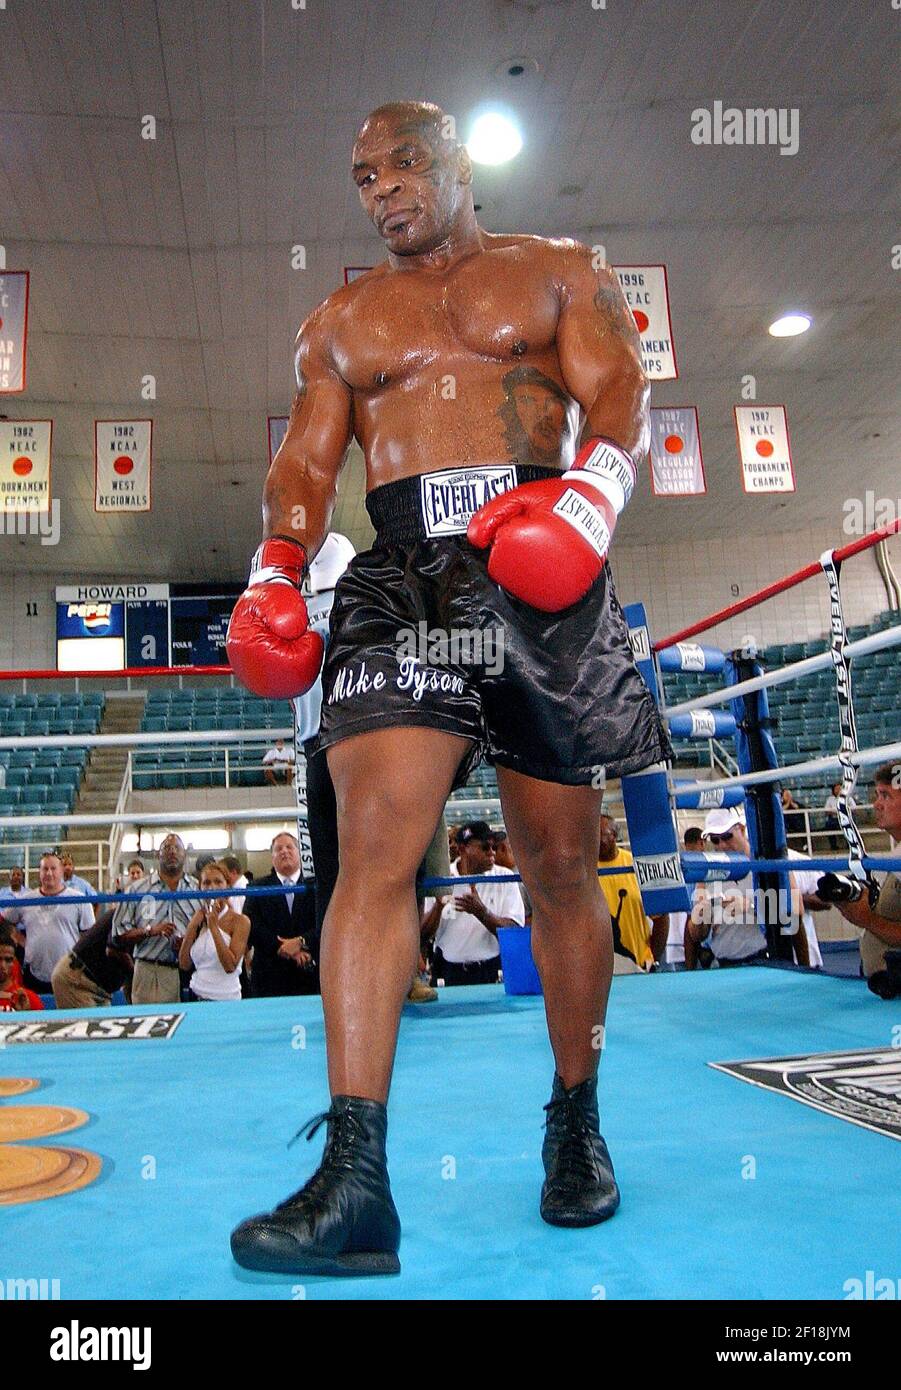 KRT SPORTS STORY SLUGGED: BOX-TYSON KRT PHOTOGRAPH BY OLIVIER  DOULIERY/ABACA PRESS (June 8) Boxer Mike Tyson walks in the ring as he  trains at Howard University in Washington, D.C. on Tuesday, June